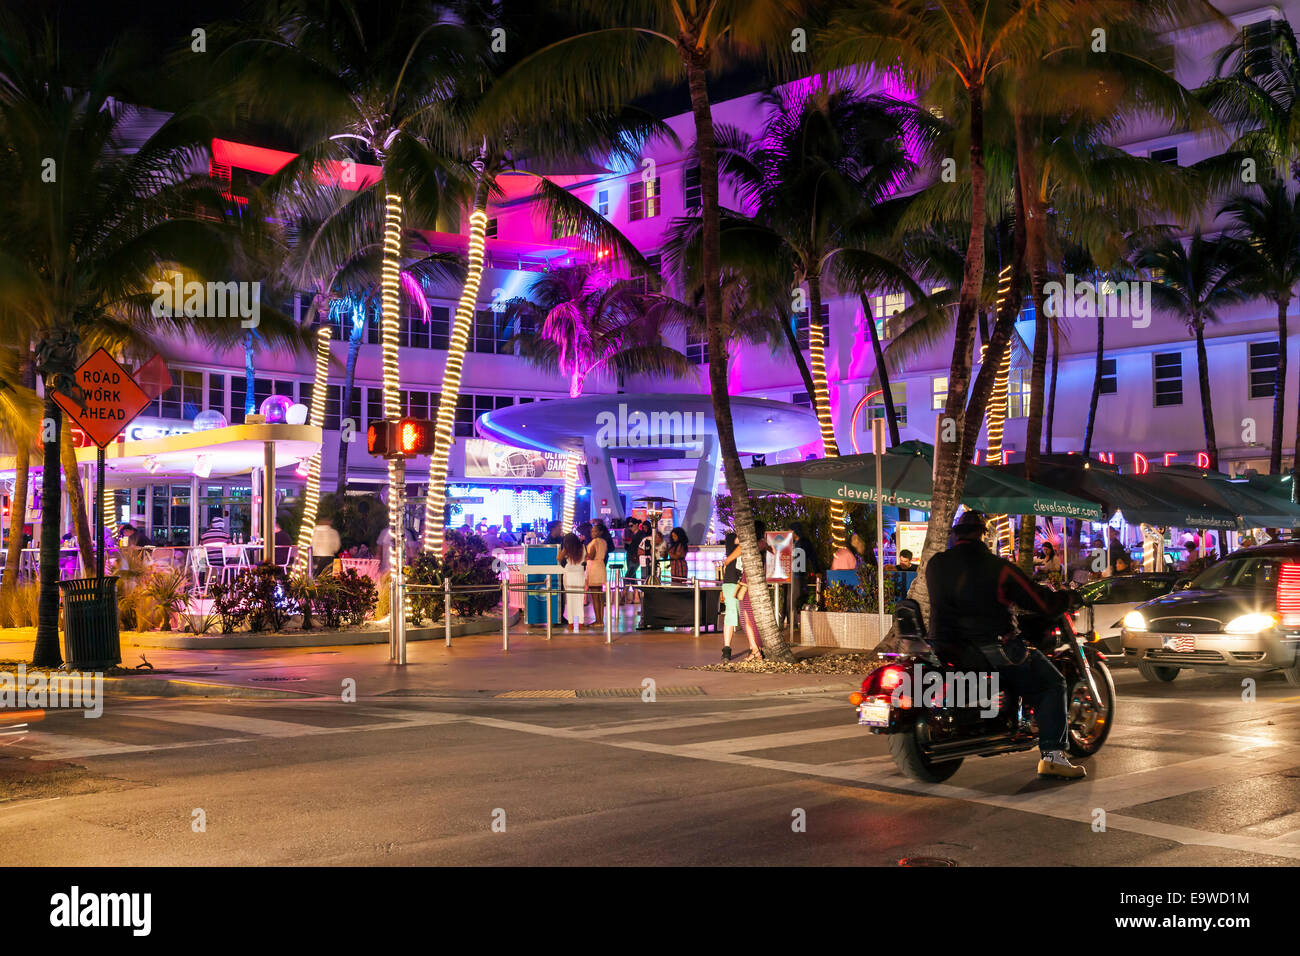 Colorful lighting of the Clevelander Hotel and Nightclub outdoor patio bar on Deco Drive in South Beach Miami, Florida, USA. Stock Photo